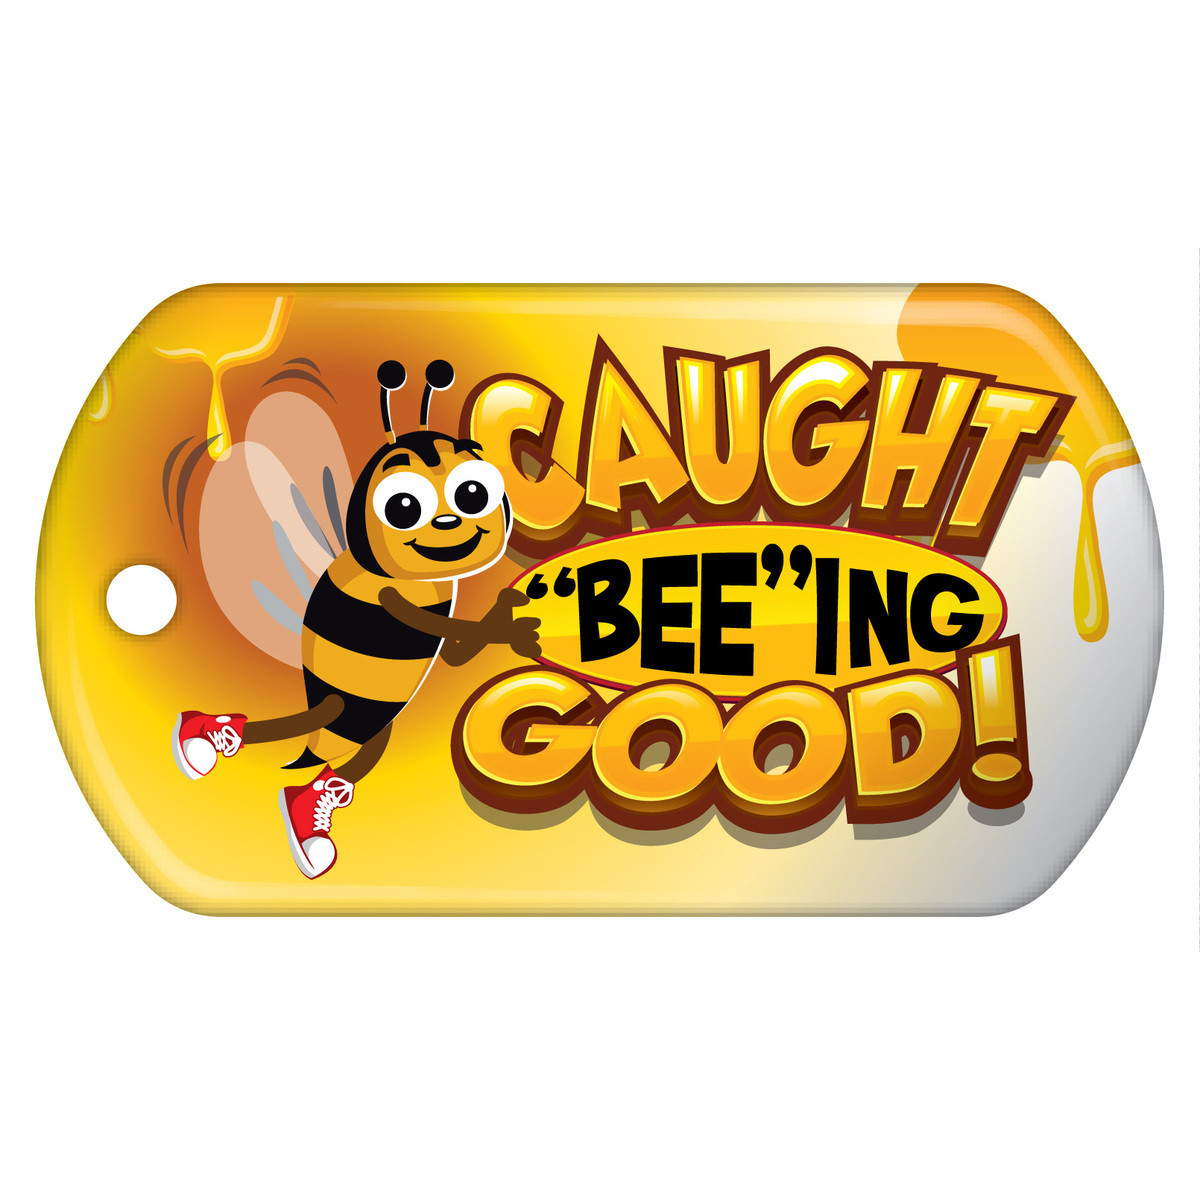 Motivation Pack Dog Brag Tags - Caught "Bee" ing Good